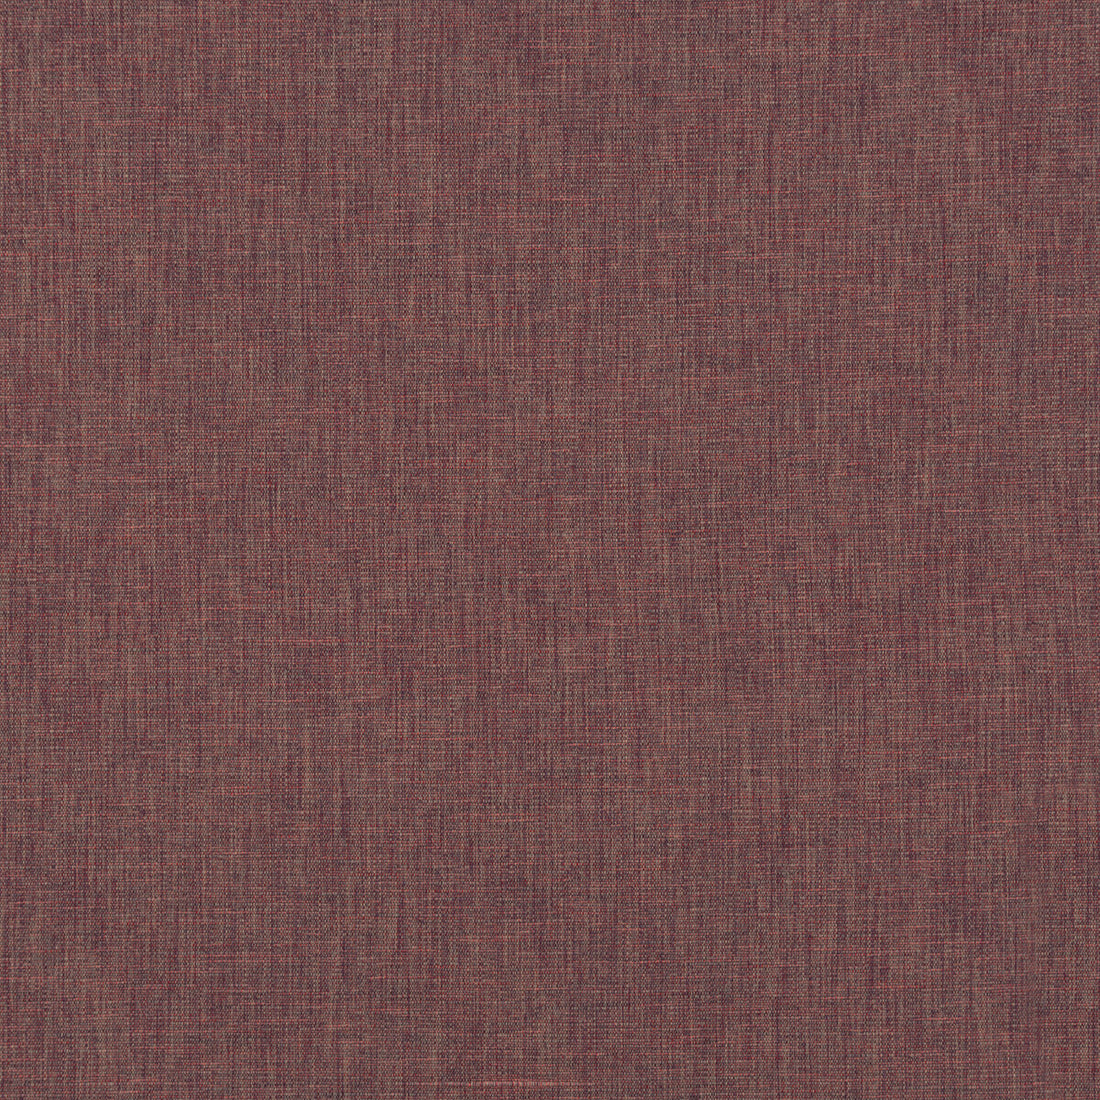 Kinnerton fabric in berry color - pattern PF50414.474.0 - by Baker Lifestyle in the Notebooks collection